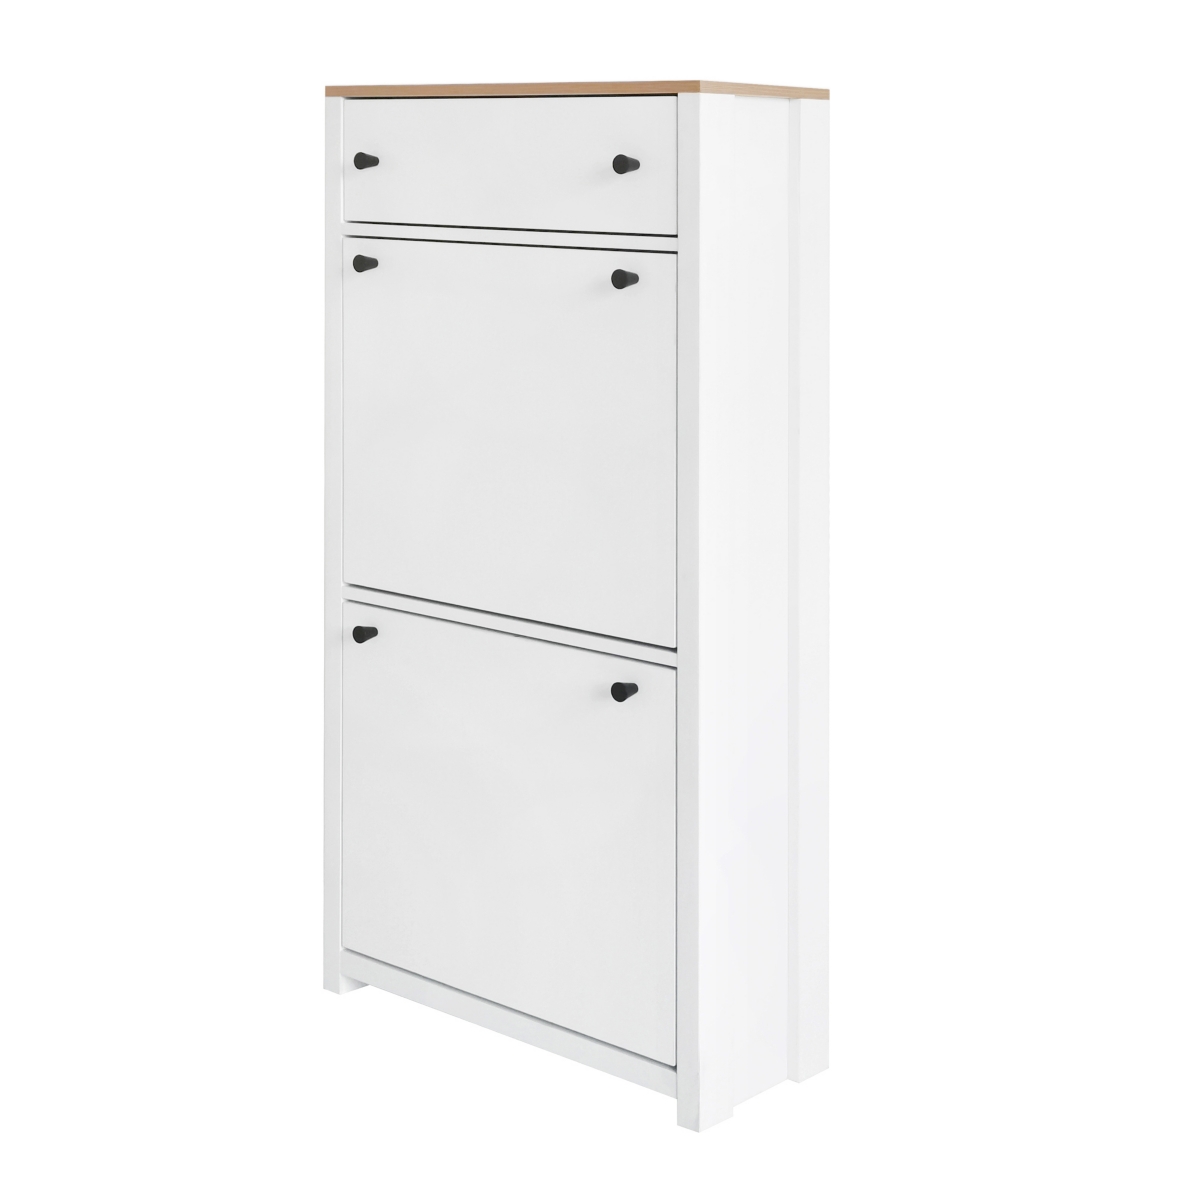 Entryway Organizer with Shoe Cabinet & Rack - White